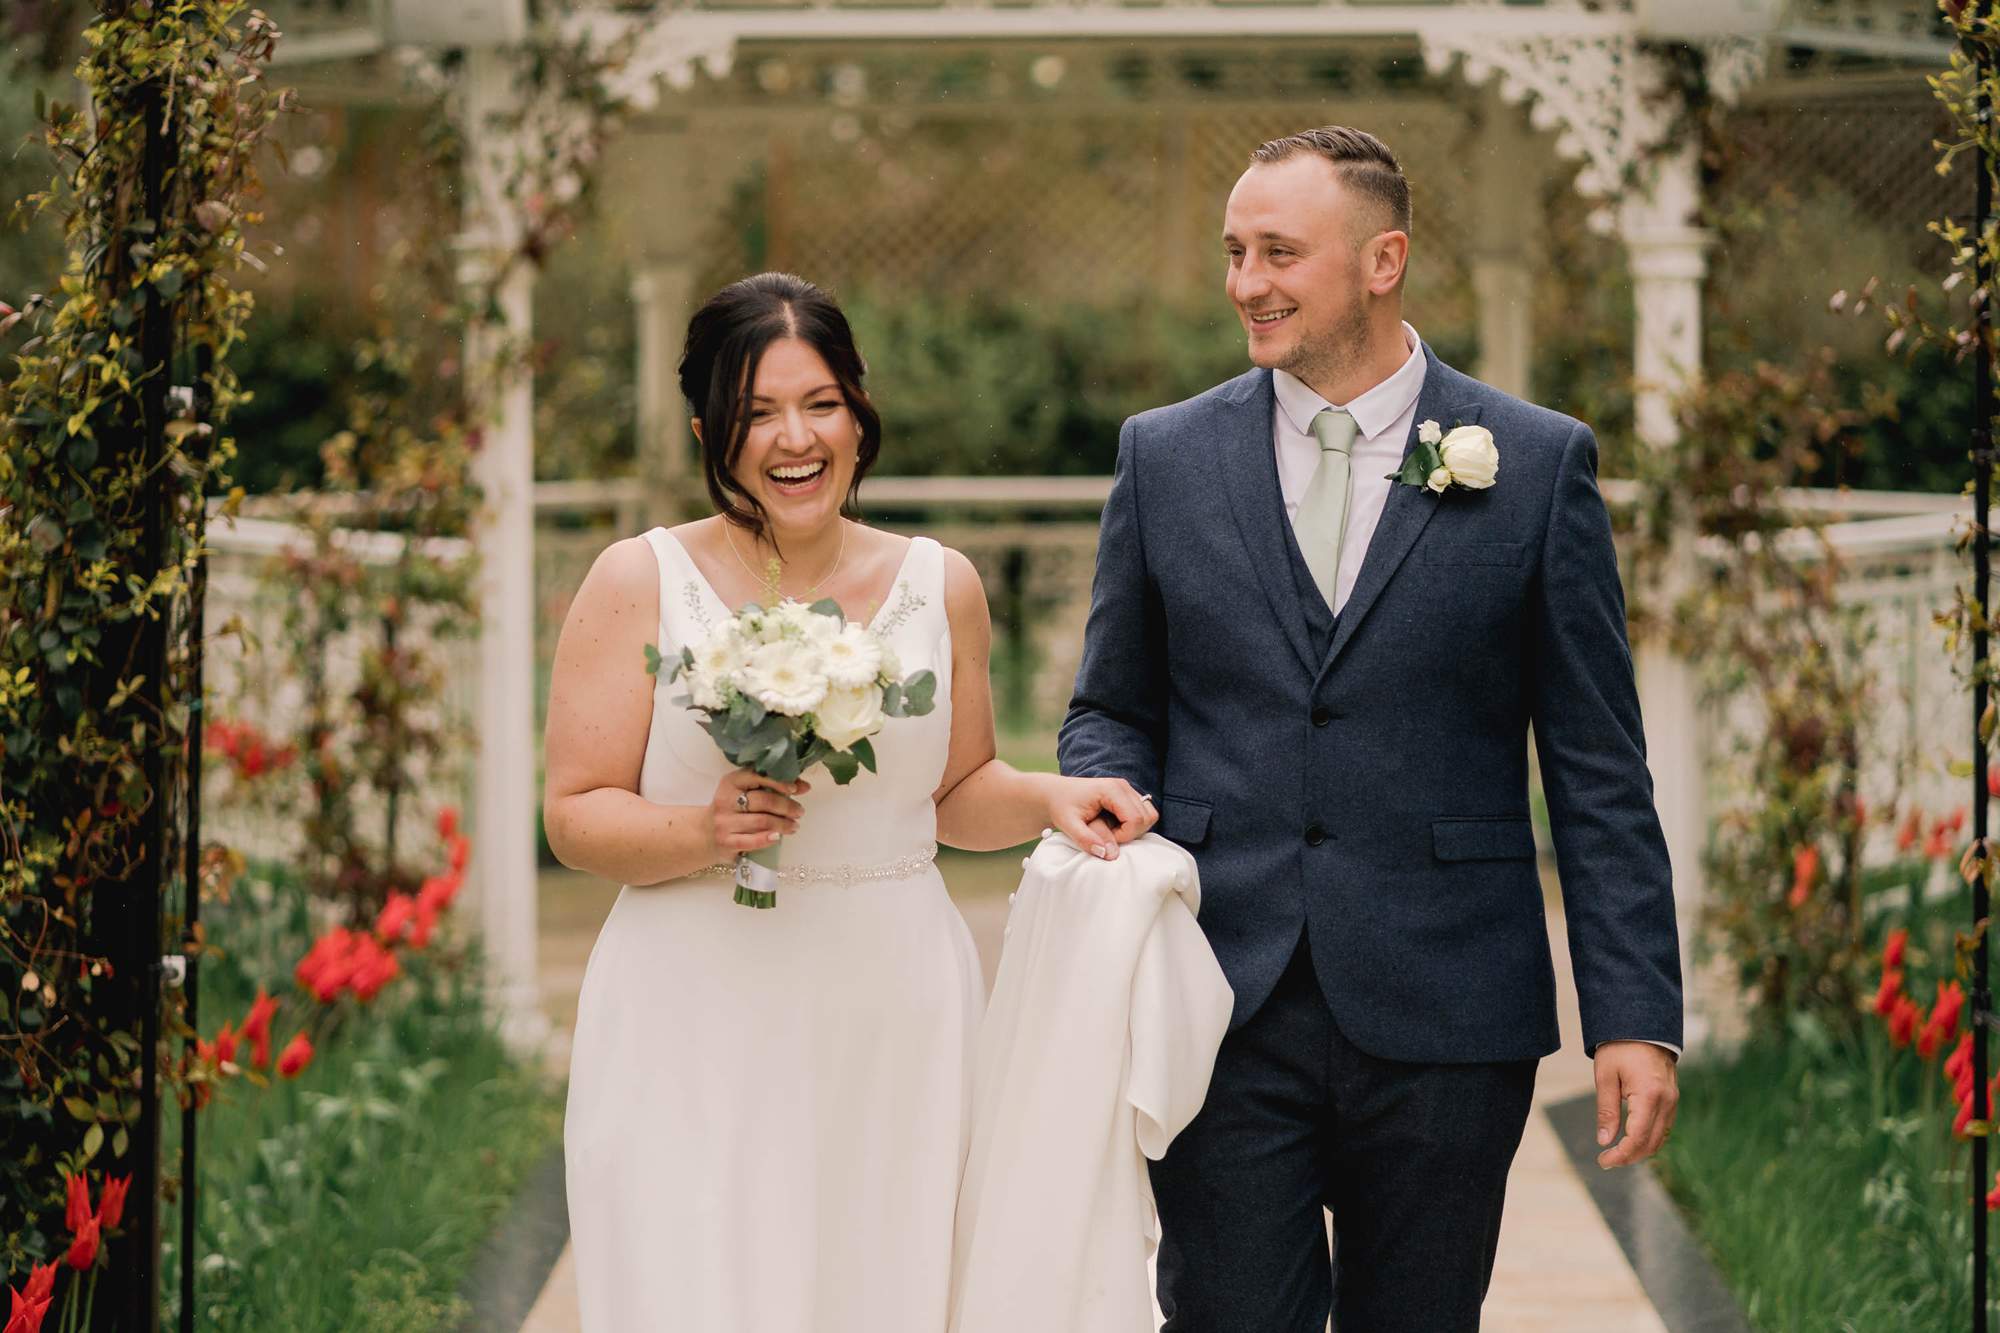 Newlyweds share a funny moment as they walk along at Guildford manor in Surrey.